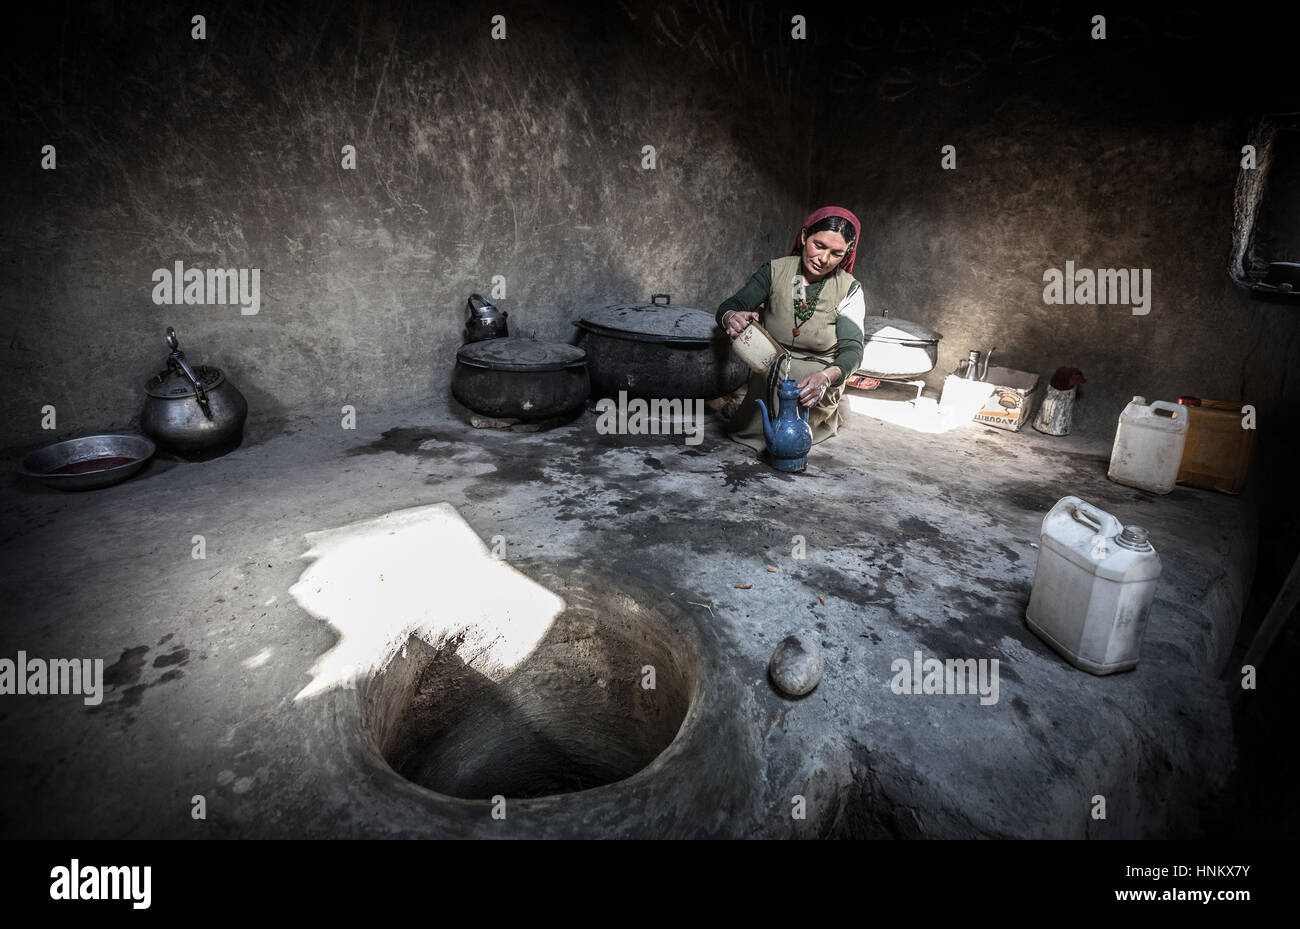 Afghanistan, Wakhan corridor,a woman is pouring water in traditional clothes, seated on the ground in stoned kitchen. Stock Photo